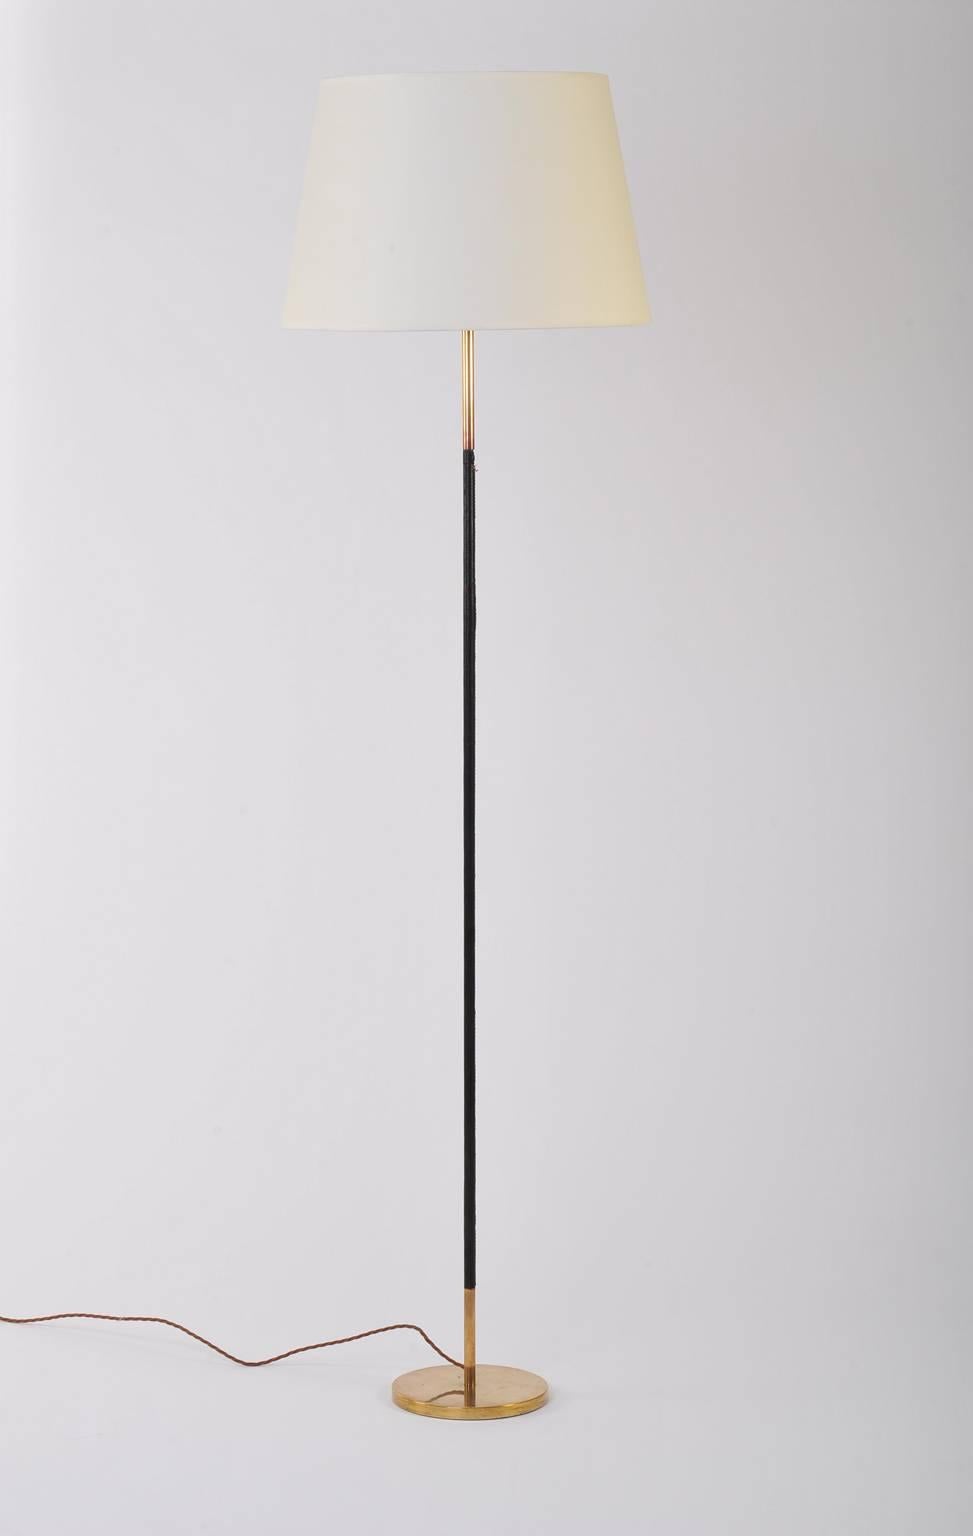 A brass and stitched black leather floor lamp, in the manner of Jacques Adnet, the elegantly thin stem supporting a bespoke ivory fabric shade
France, circa 1950.